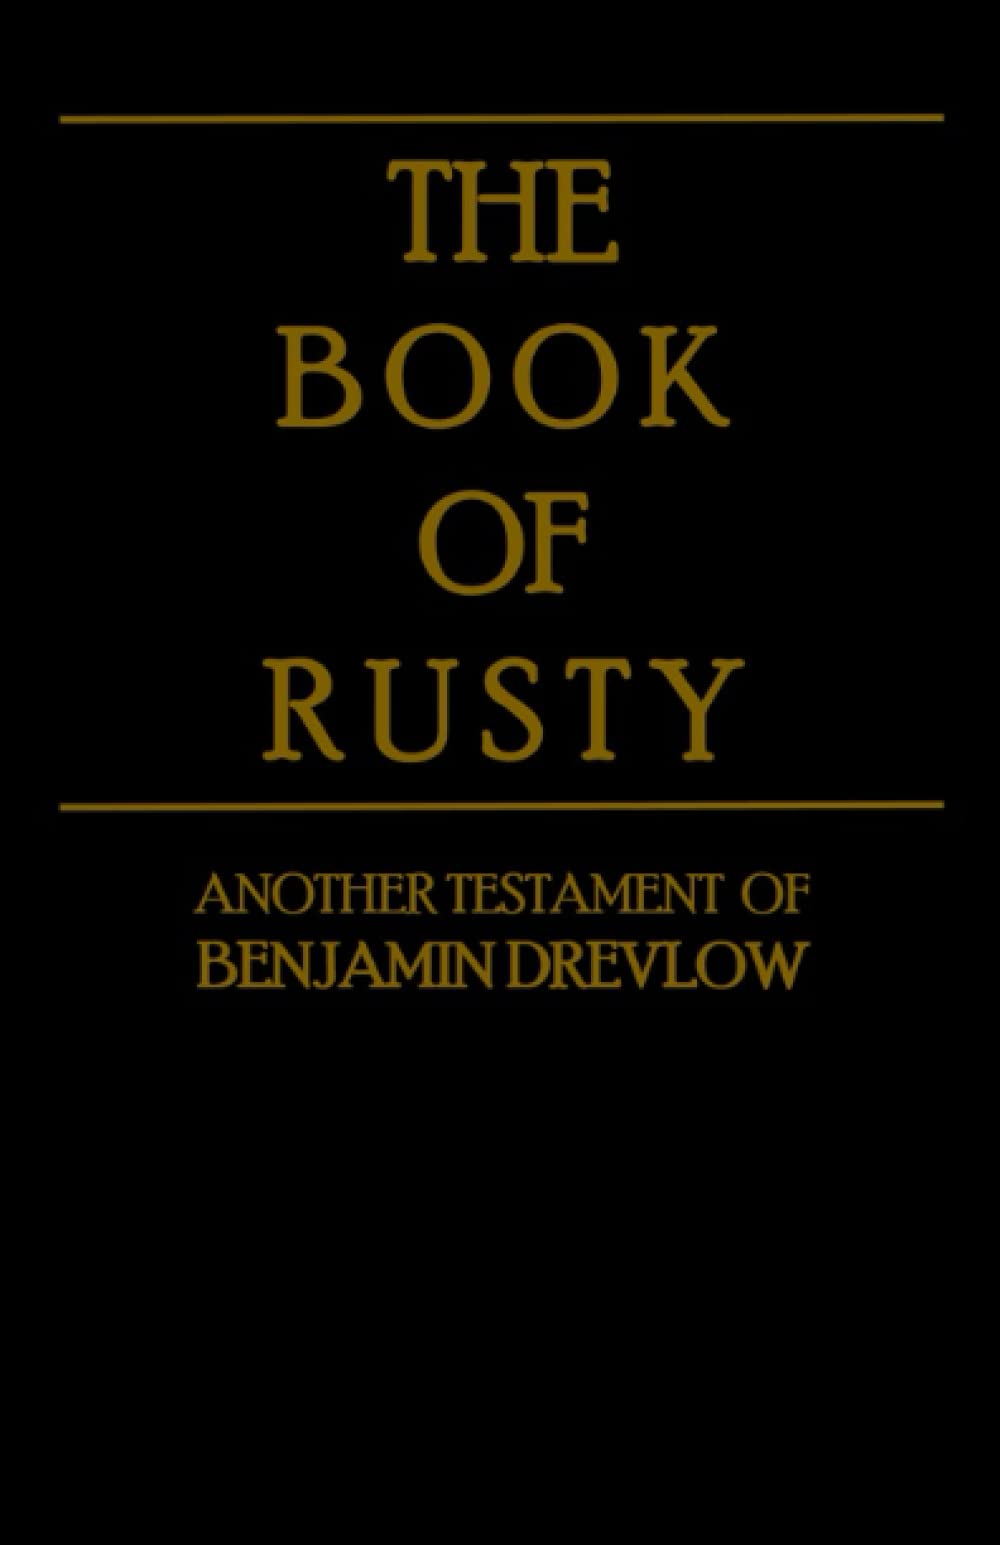 black cover with gold lettering "The Book of Rusty: Another Testament by Benjamin Drevlow"